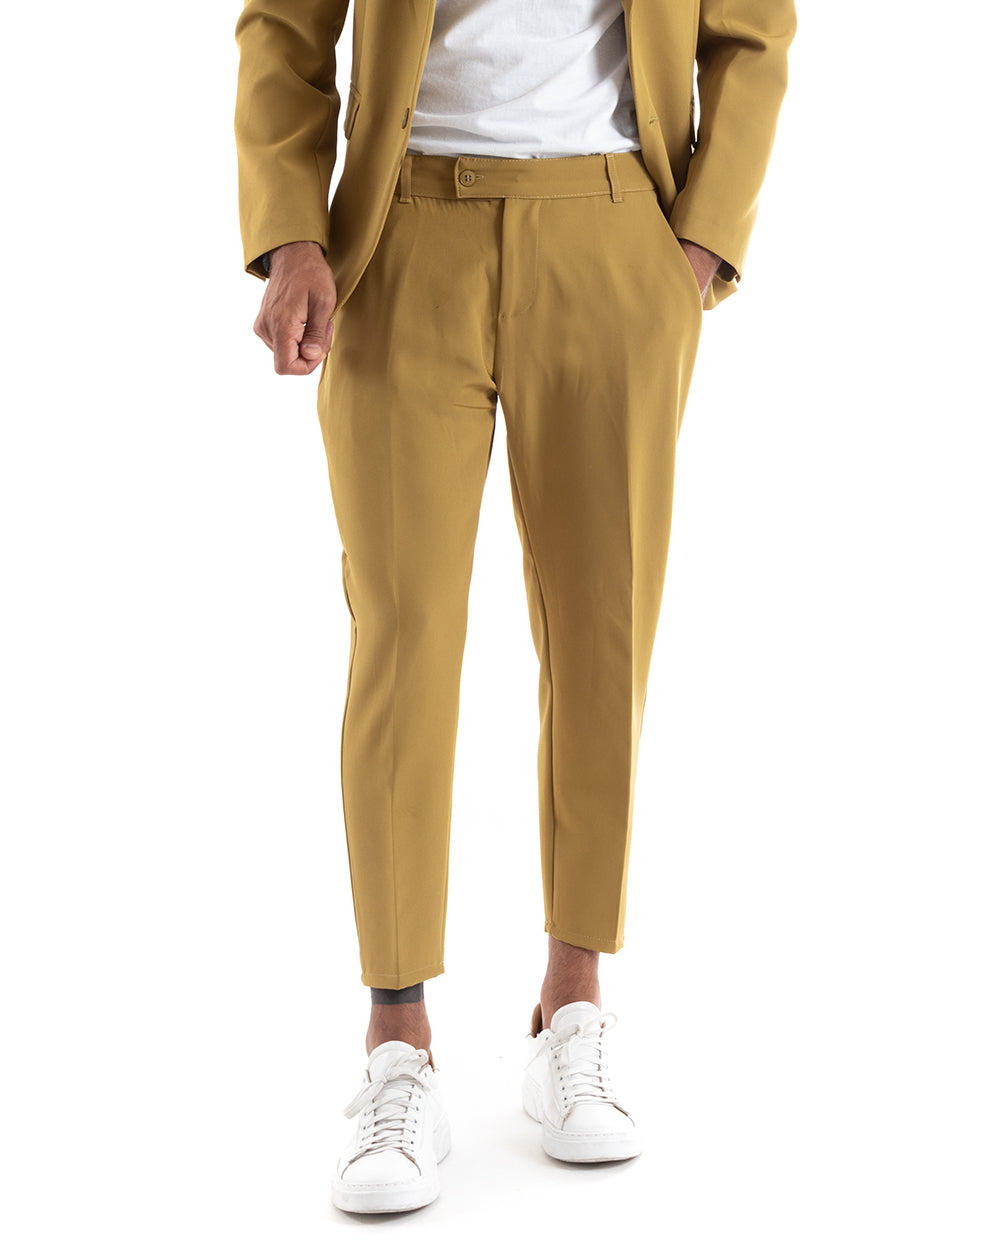 Single Breasted Men's Suit Viscose Suit Jacket Pants Mustard Elegant Ceremony GIOSAL-OU2147A